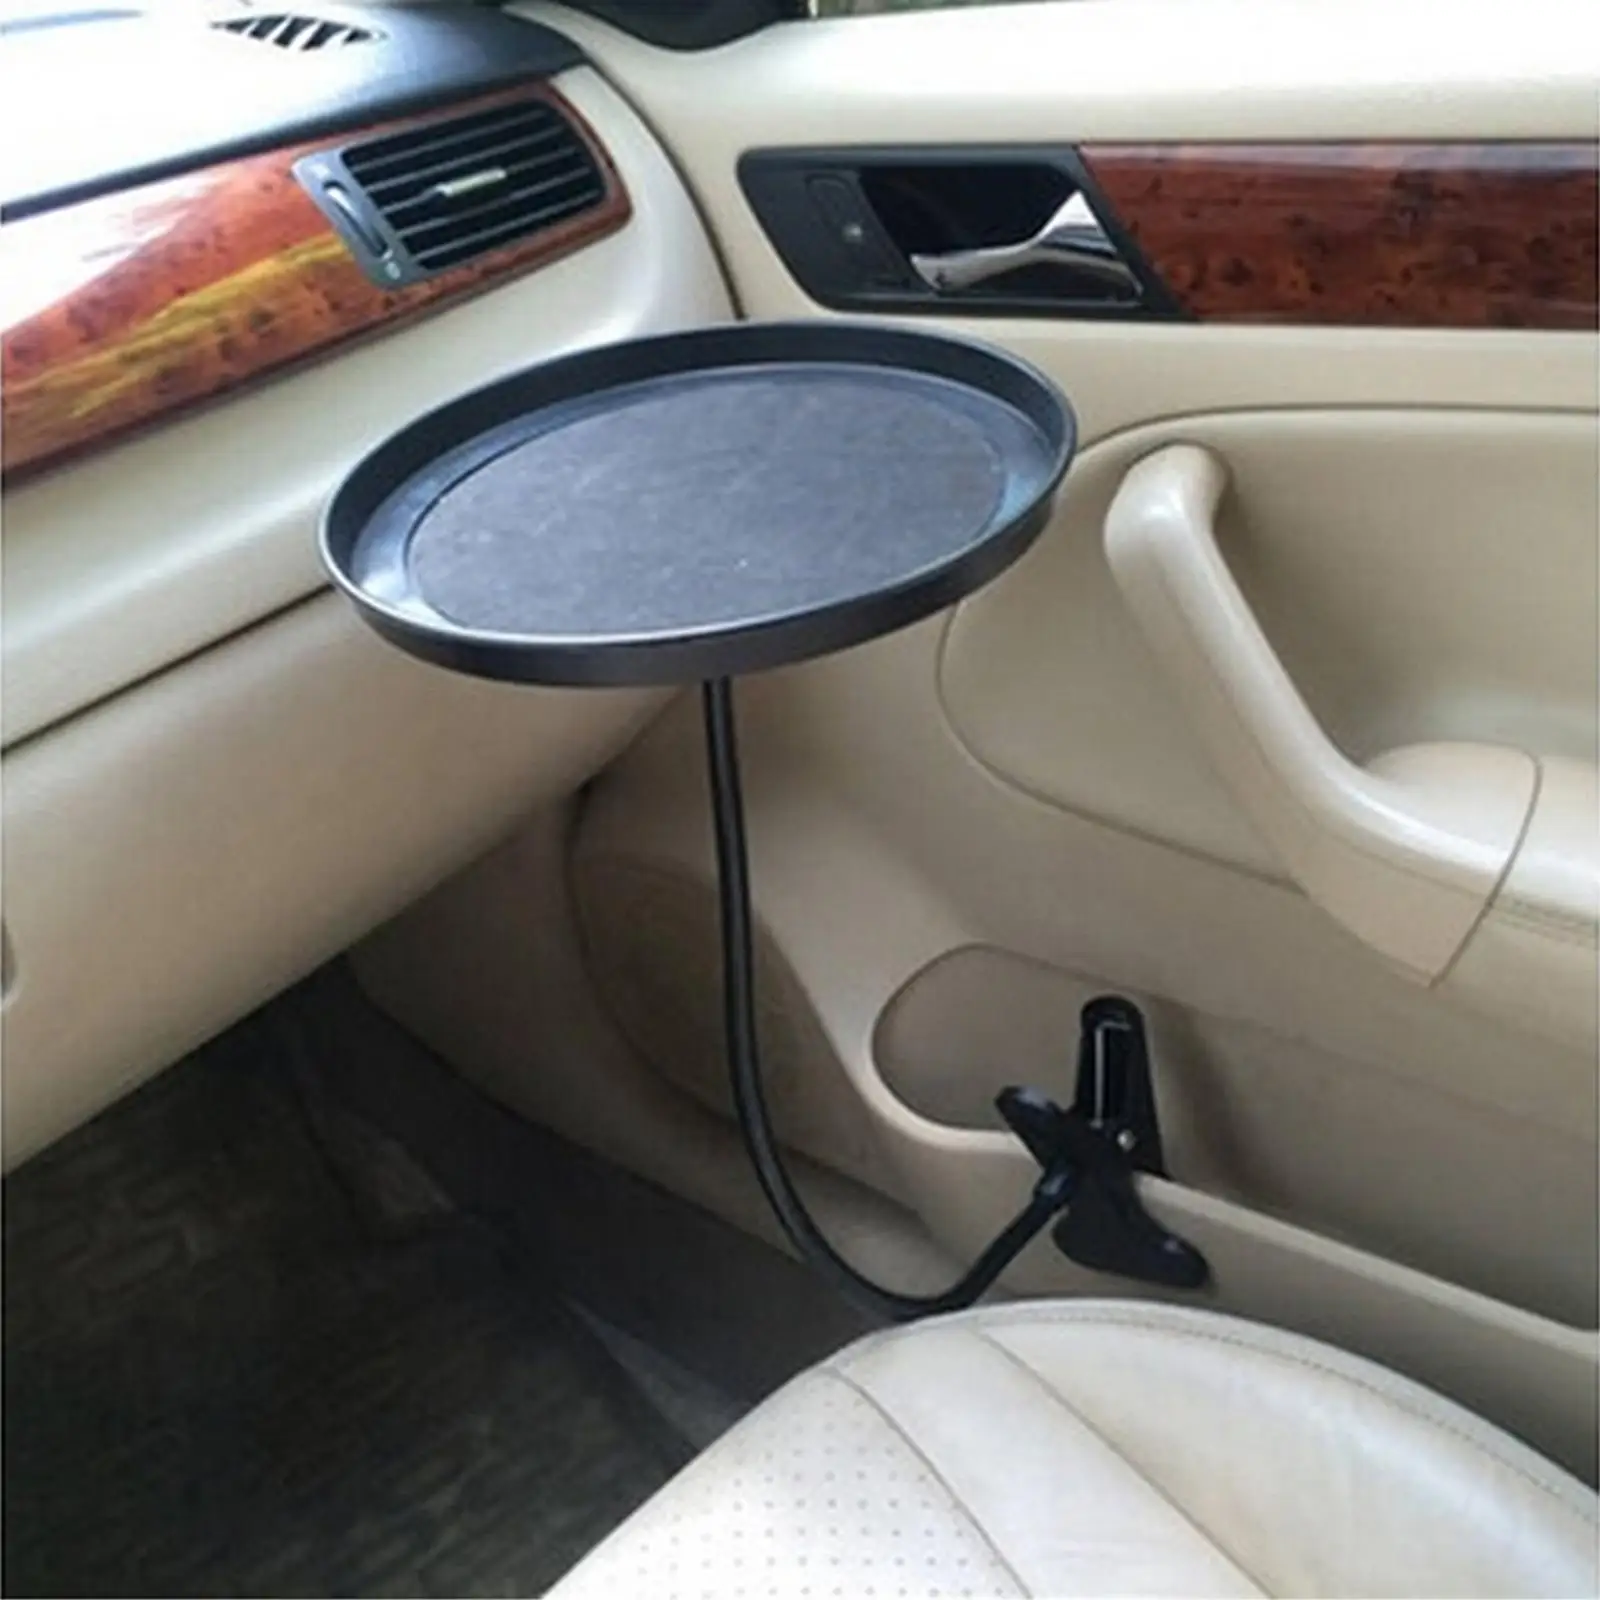 1Pcs Car Food Tray Anti-Slip Plastic Adjustable Round Universal Holder with Clamp Fits for Passenger Seat Bottle Coffee Auto